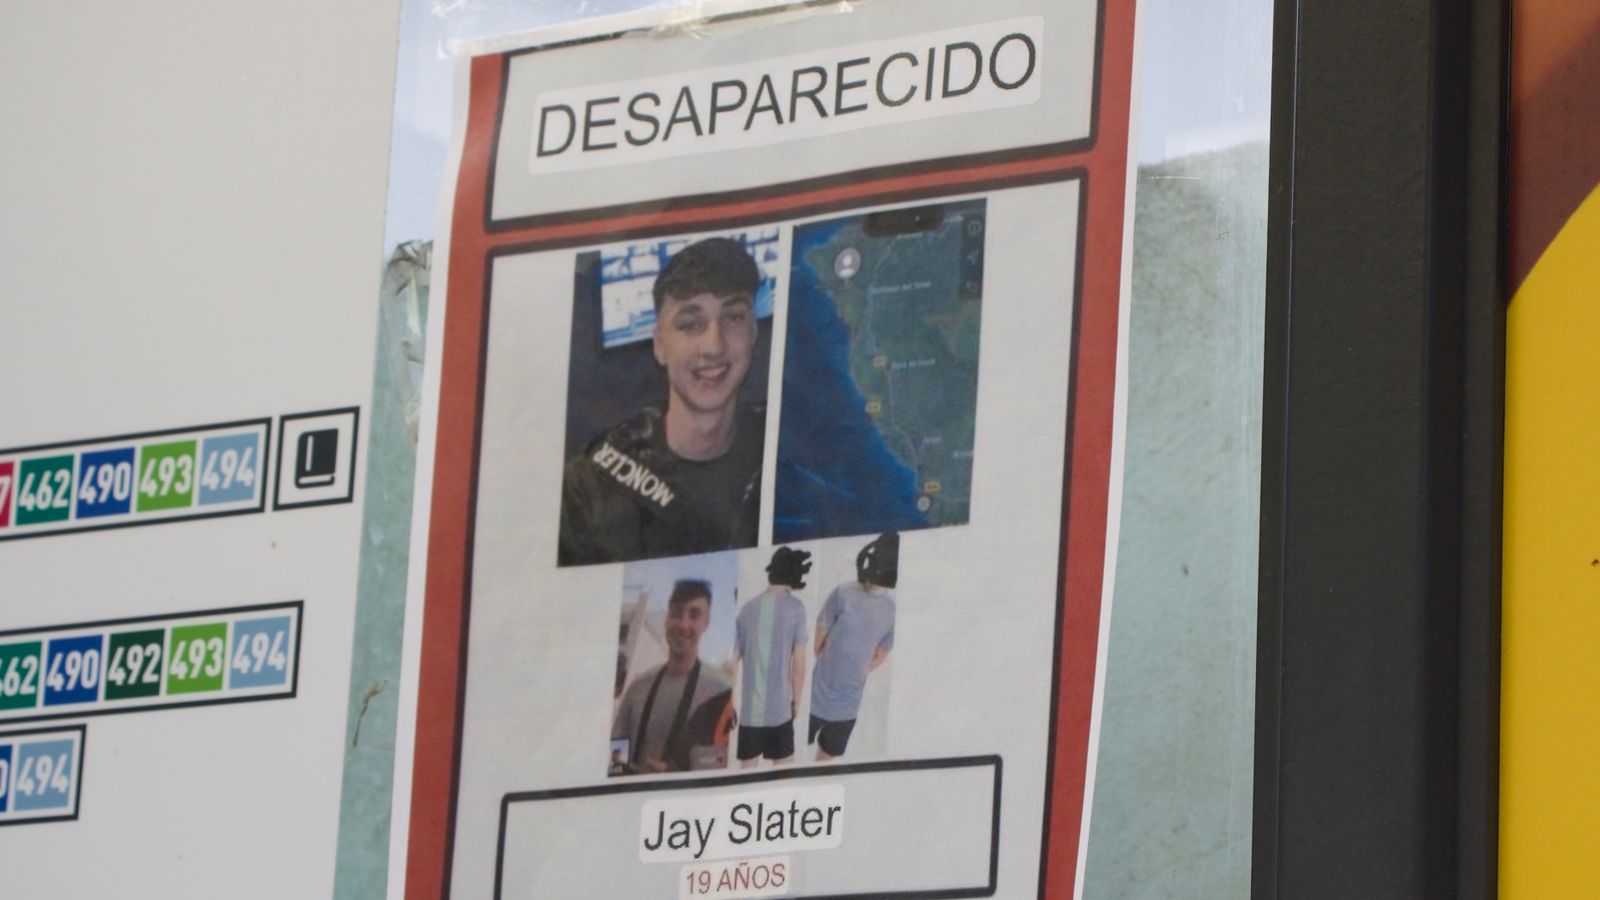 Jay Slater search: His journey, outstanding questions and one final push to find missing teenager